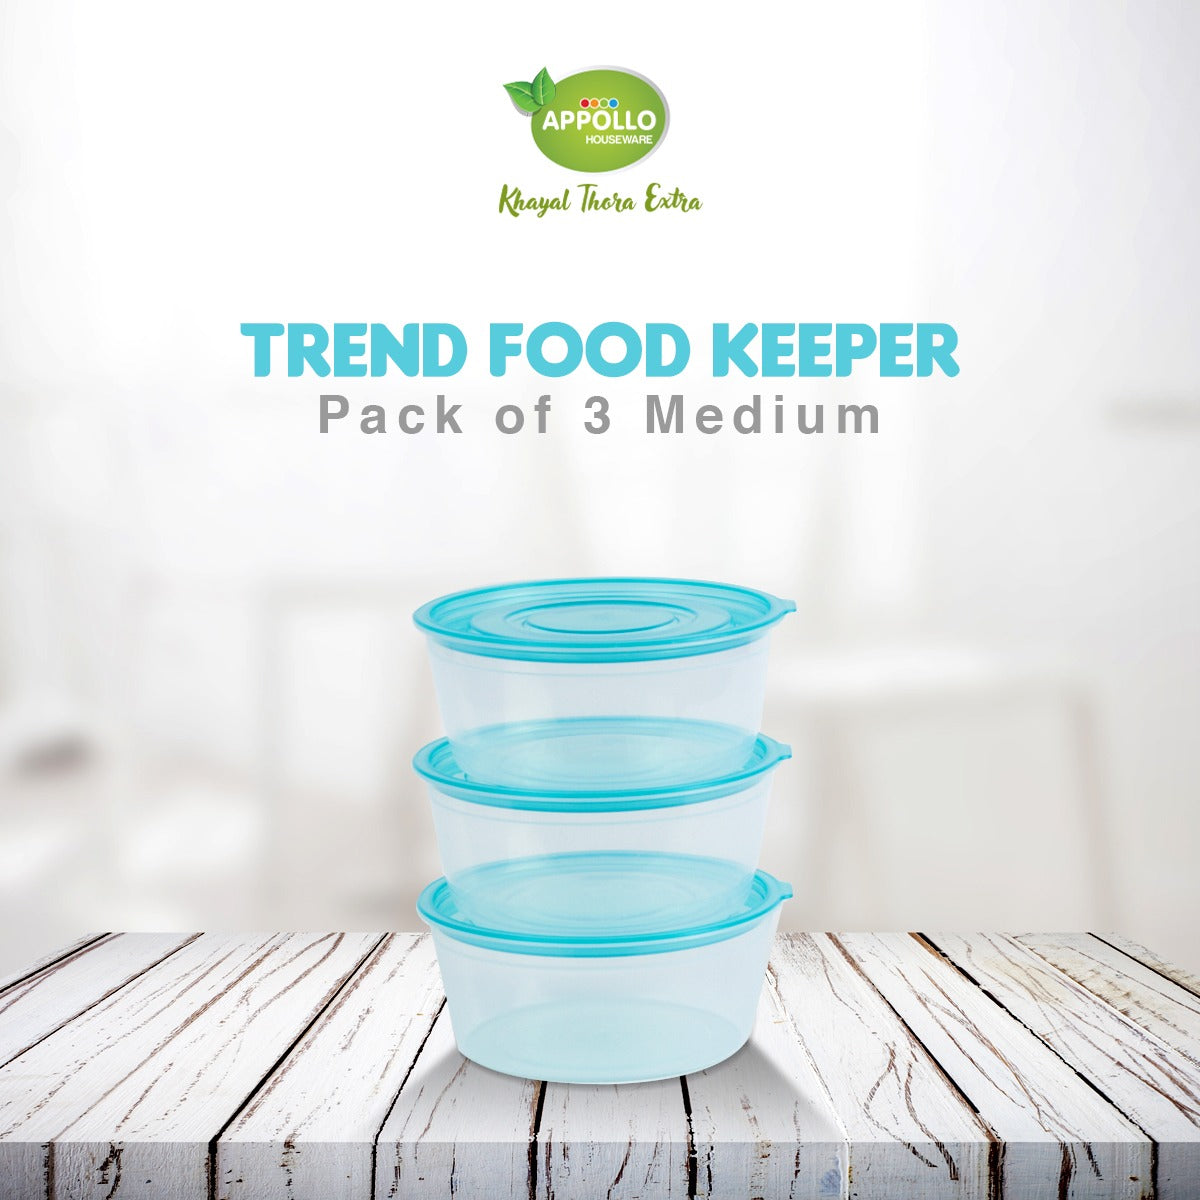 Appollo Trend Food Keeper - Pack of 3